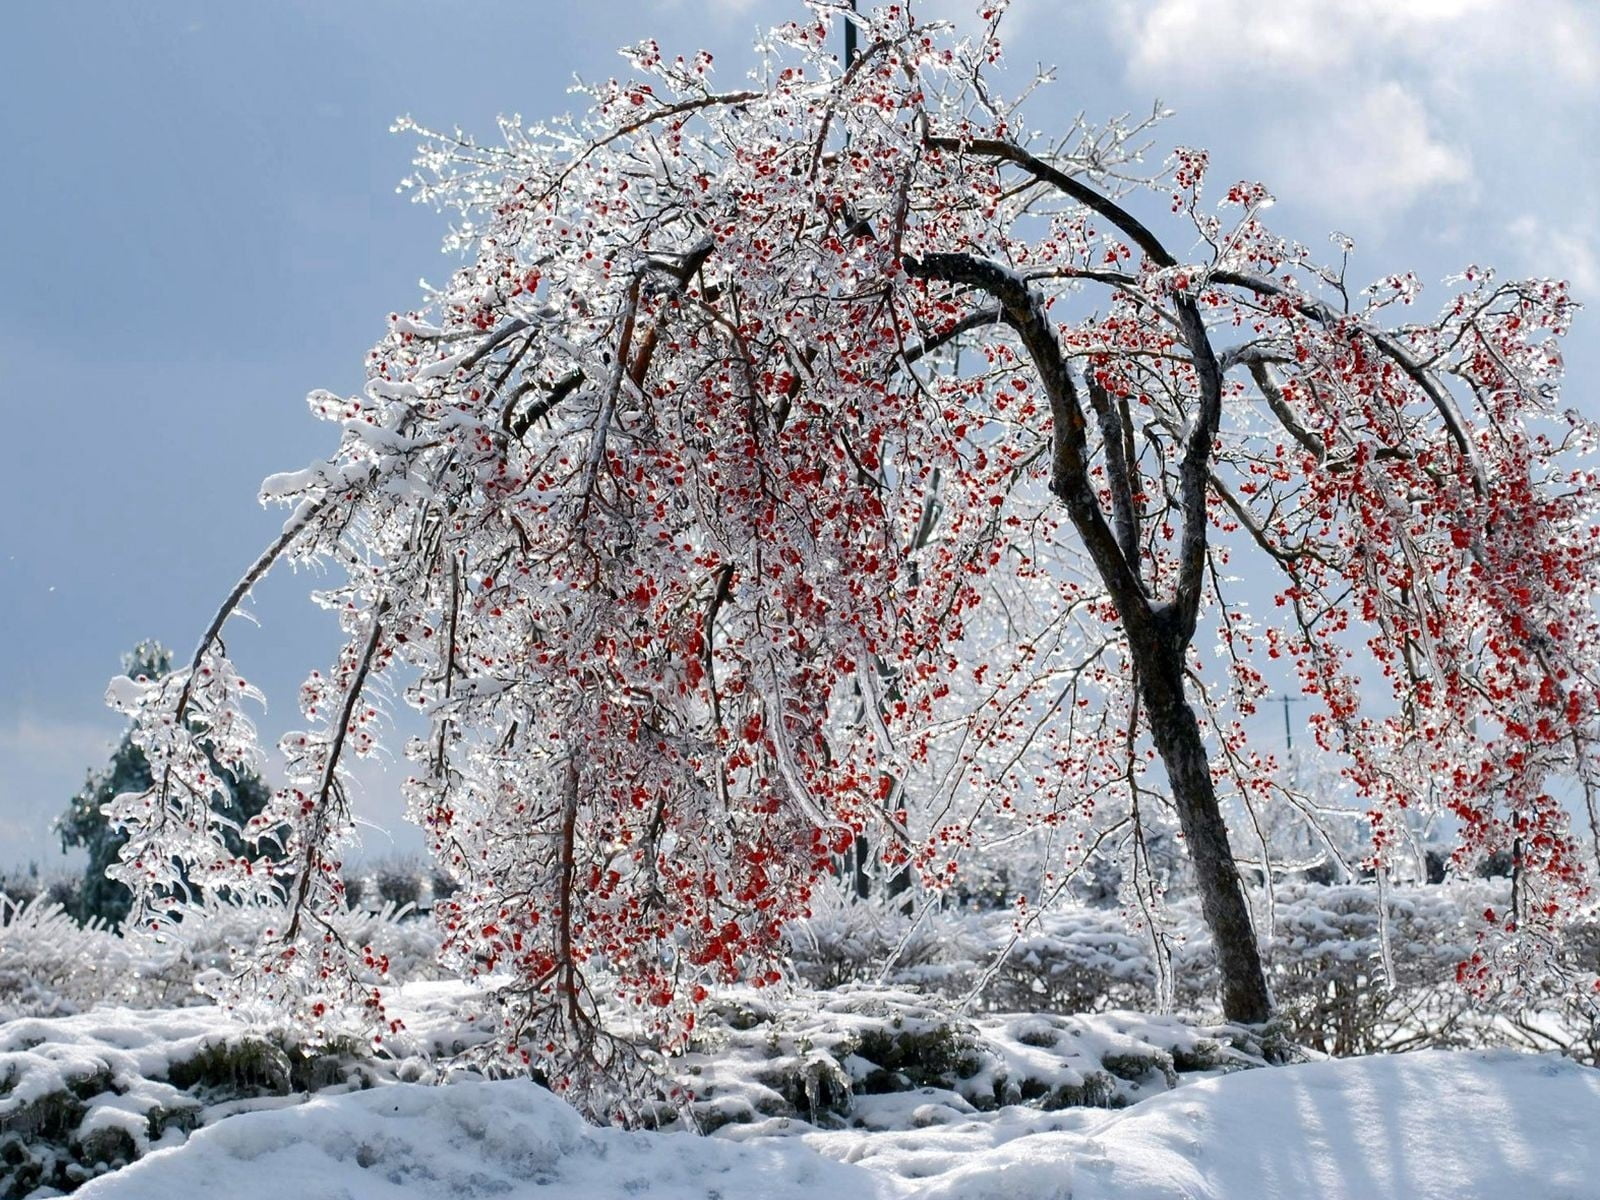 witted tree, branches, fruits, snow, ice, winter, nature, season